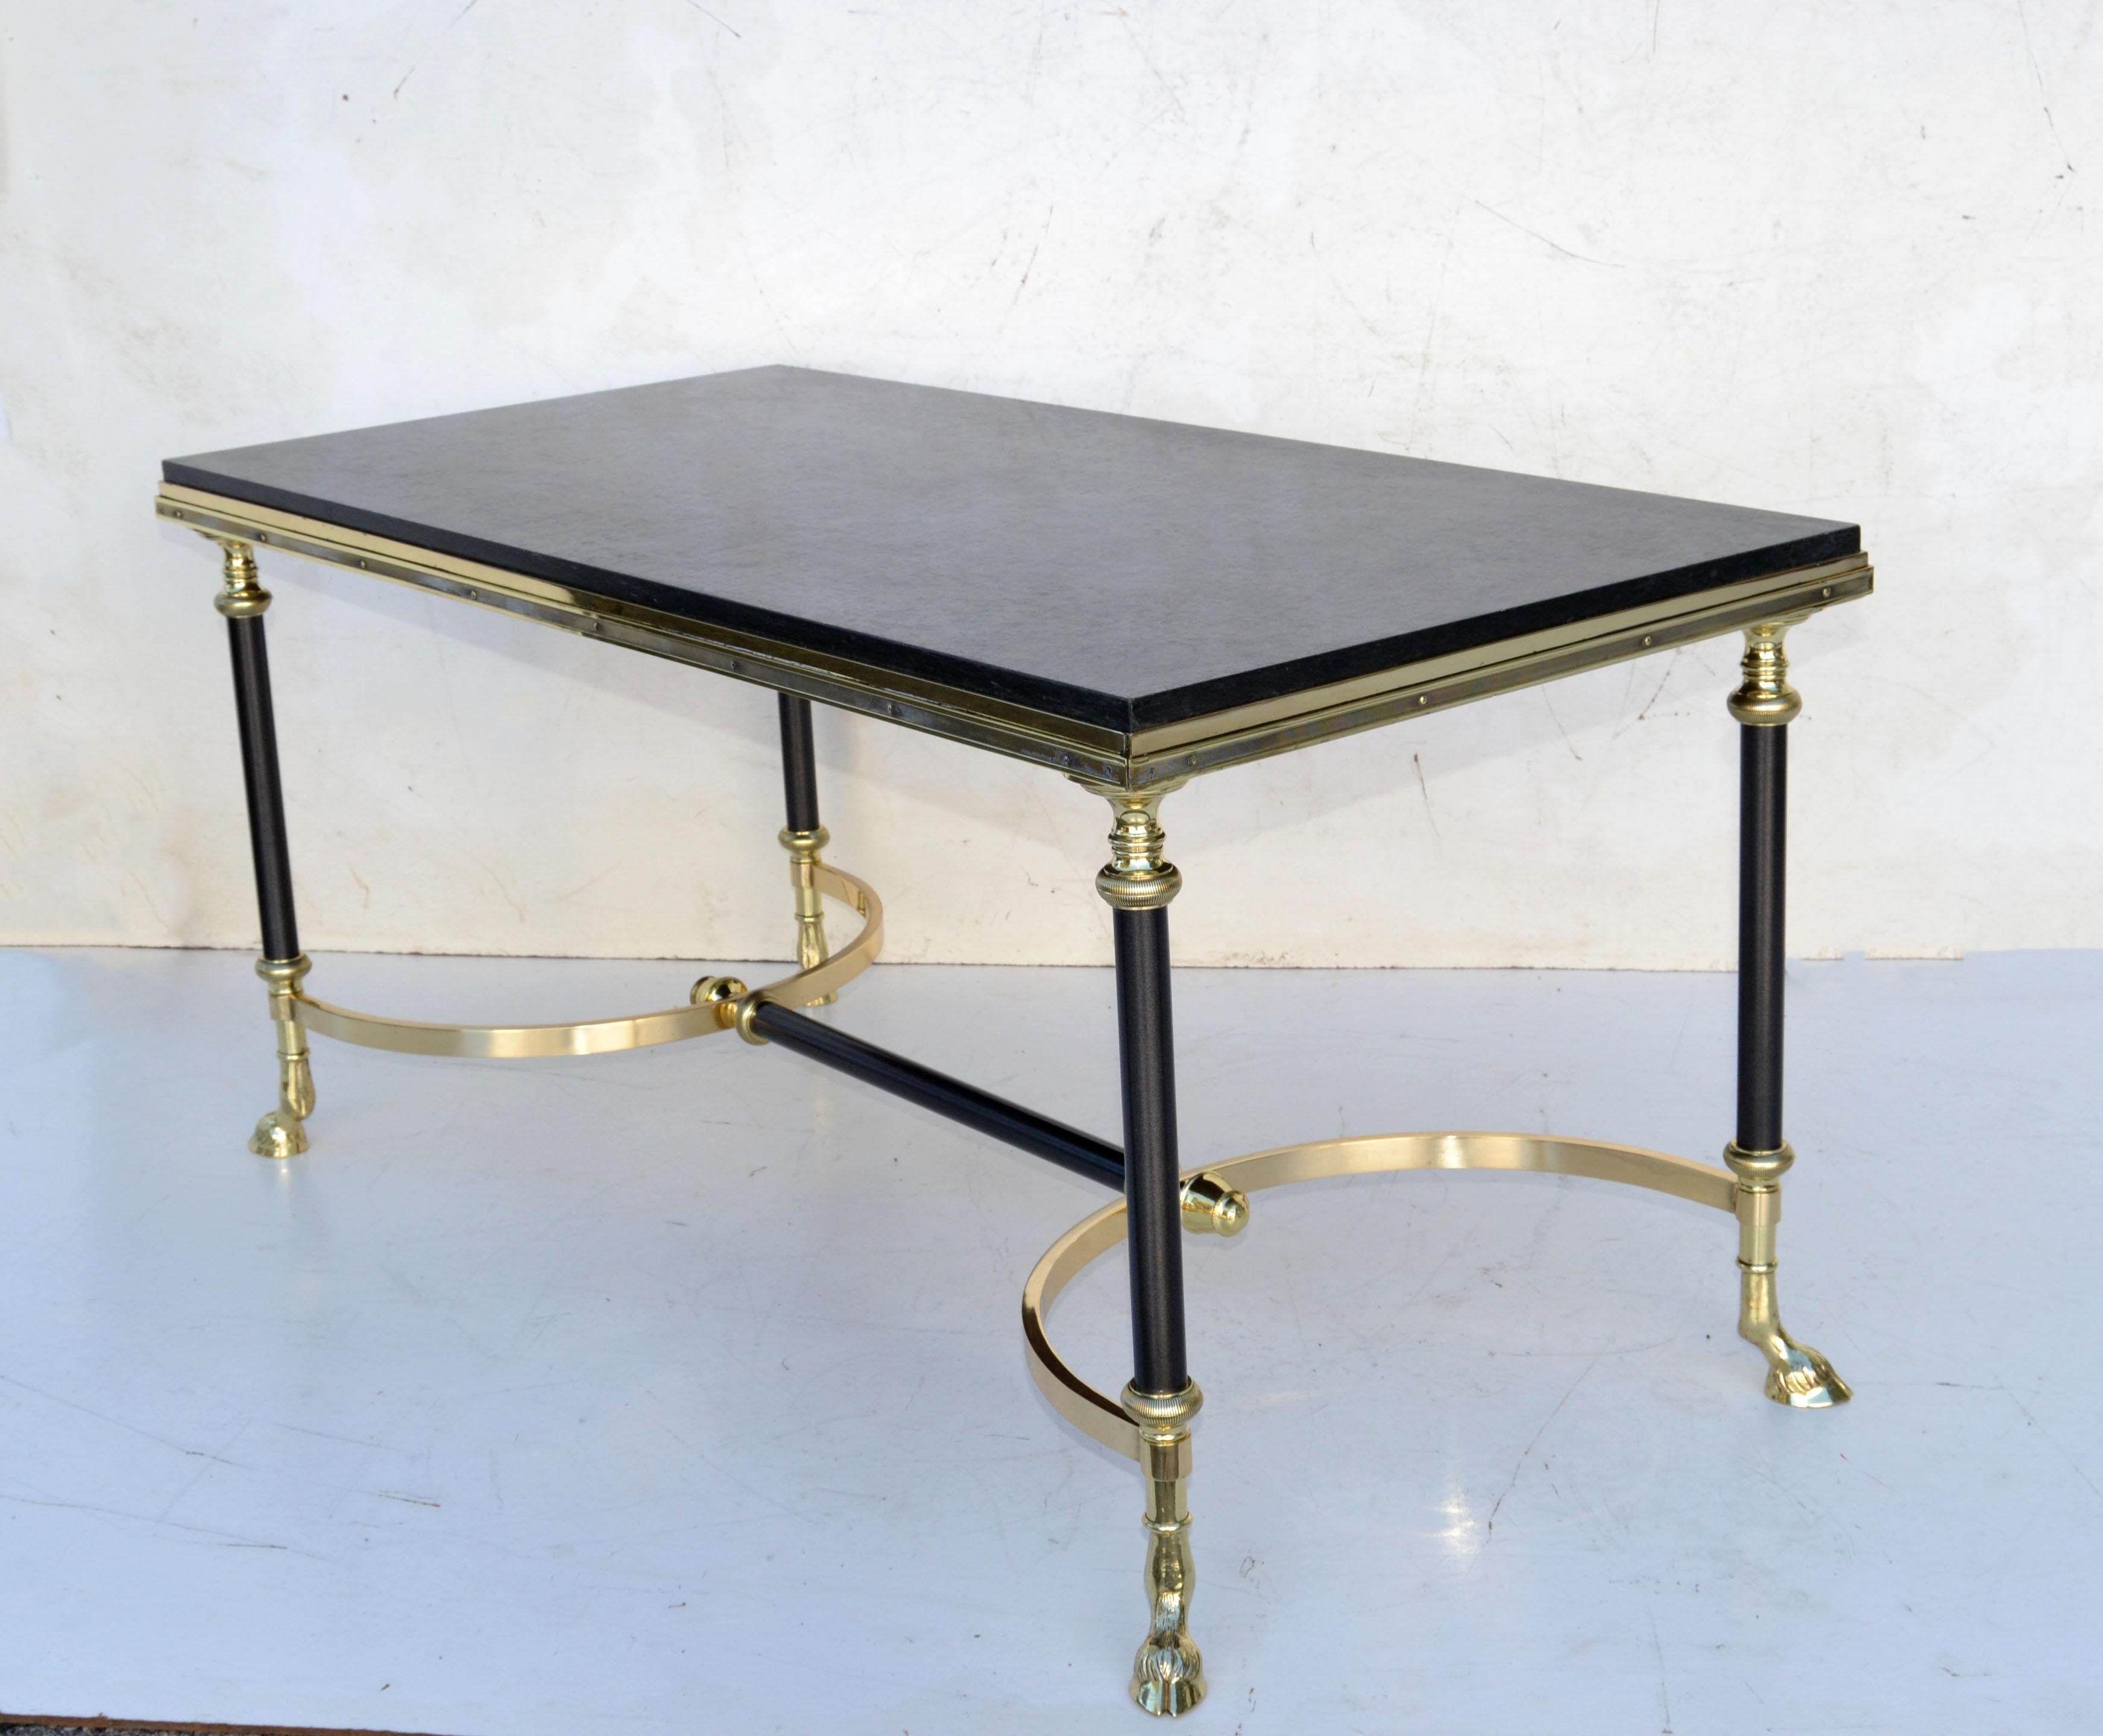 Superb Neoclassical Maison Charles Coffee Table made out of Steel, two patina polished Brass and Wood which supports the thick dark gray-greenish Marble Top.
Marble measures:
19.5 x 1 x 39.5 inches.
Stunning French Craftsmanship. 
Newly restored.